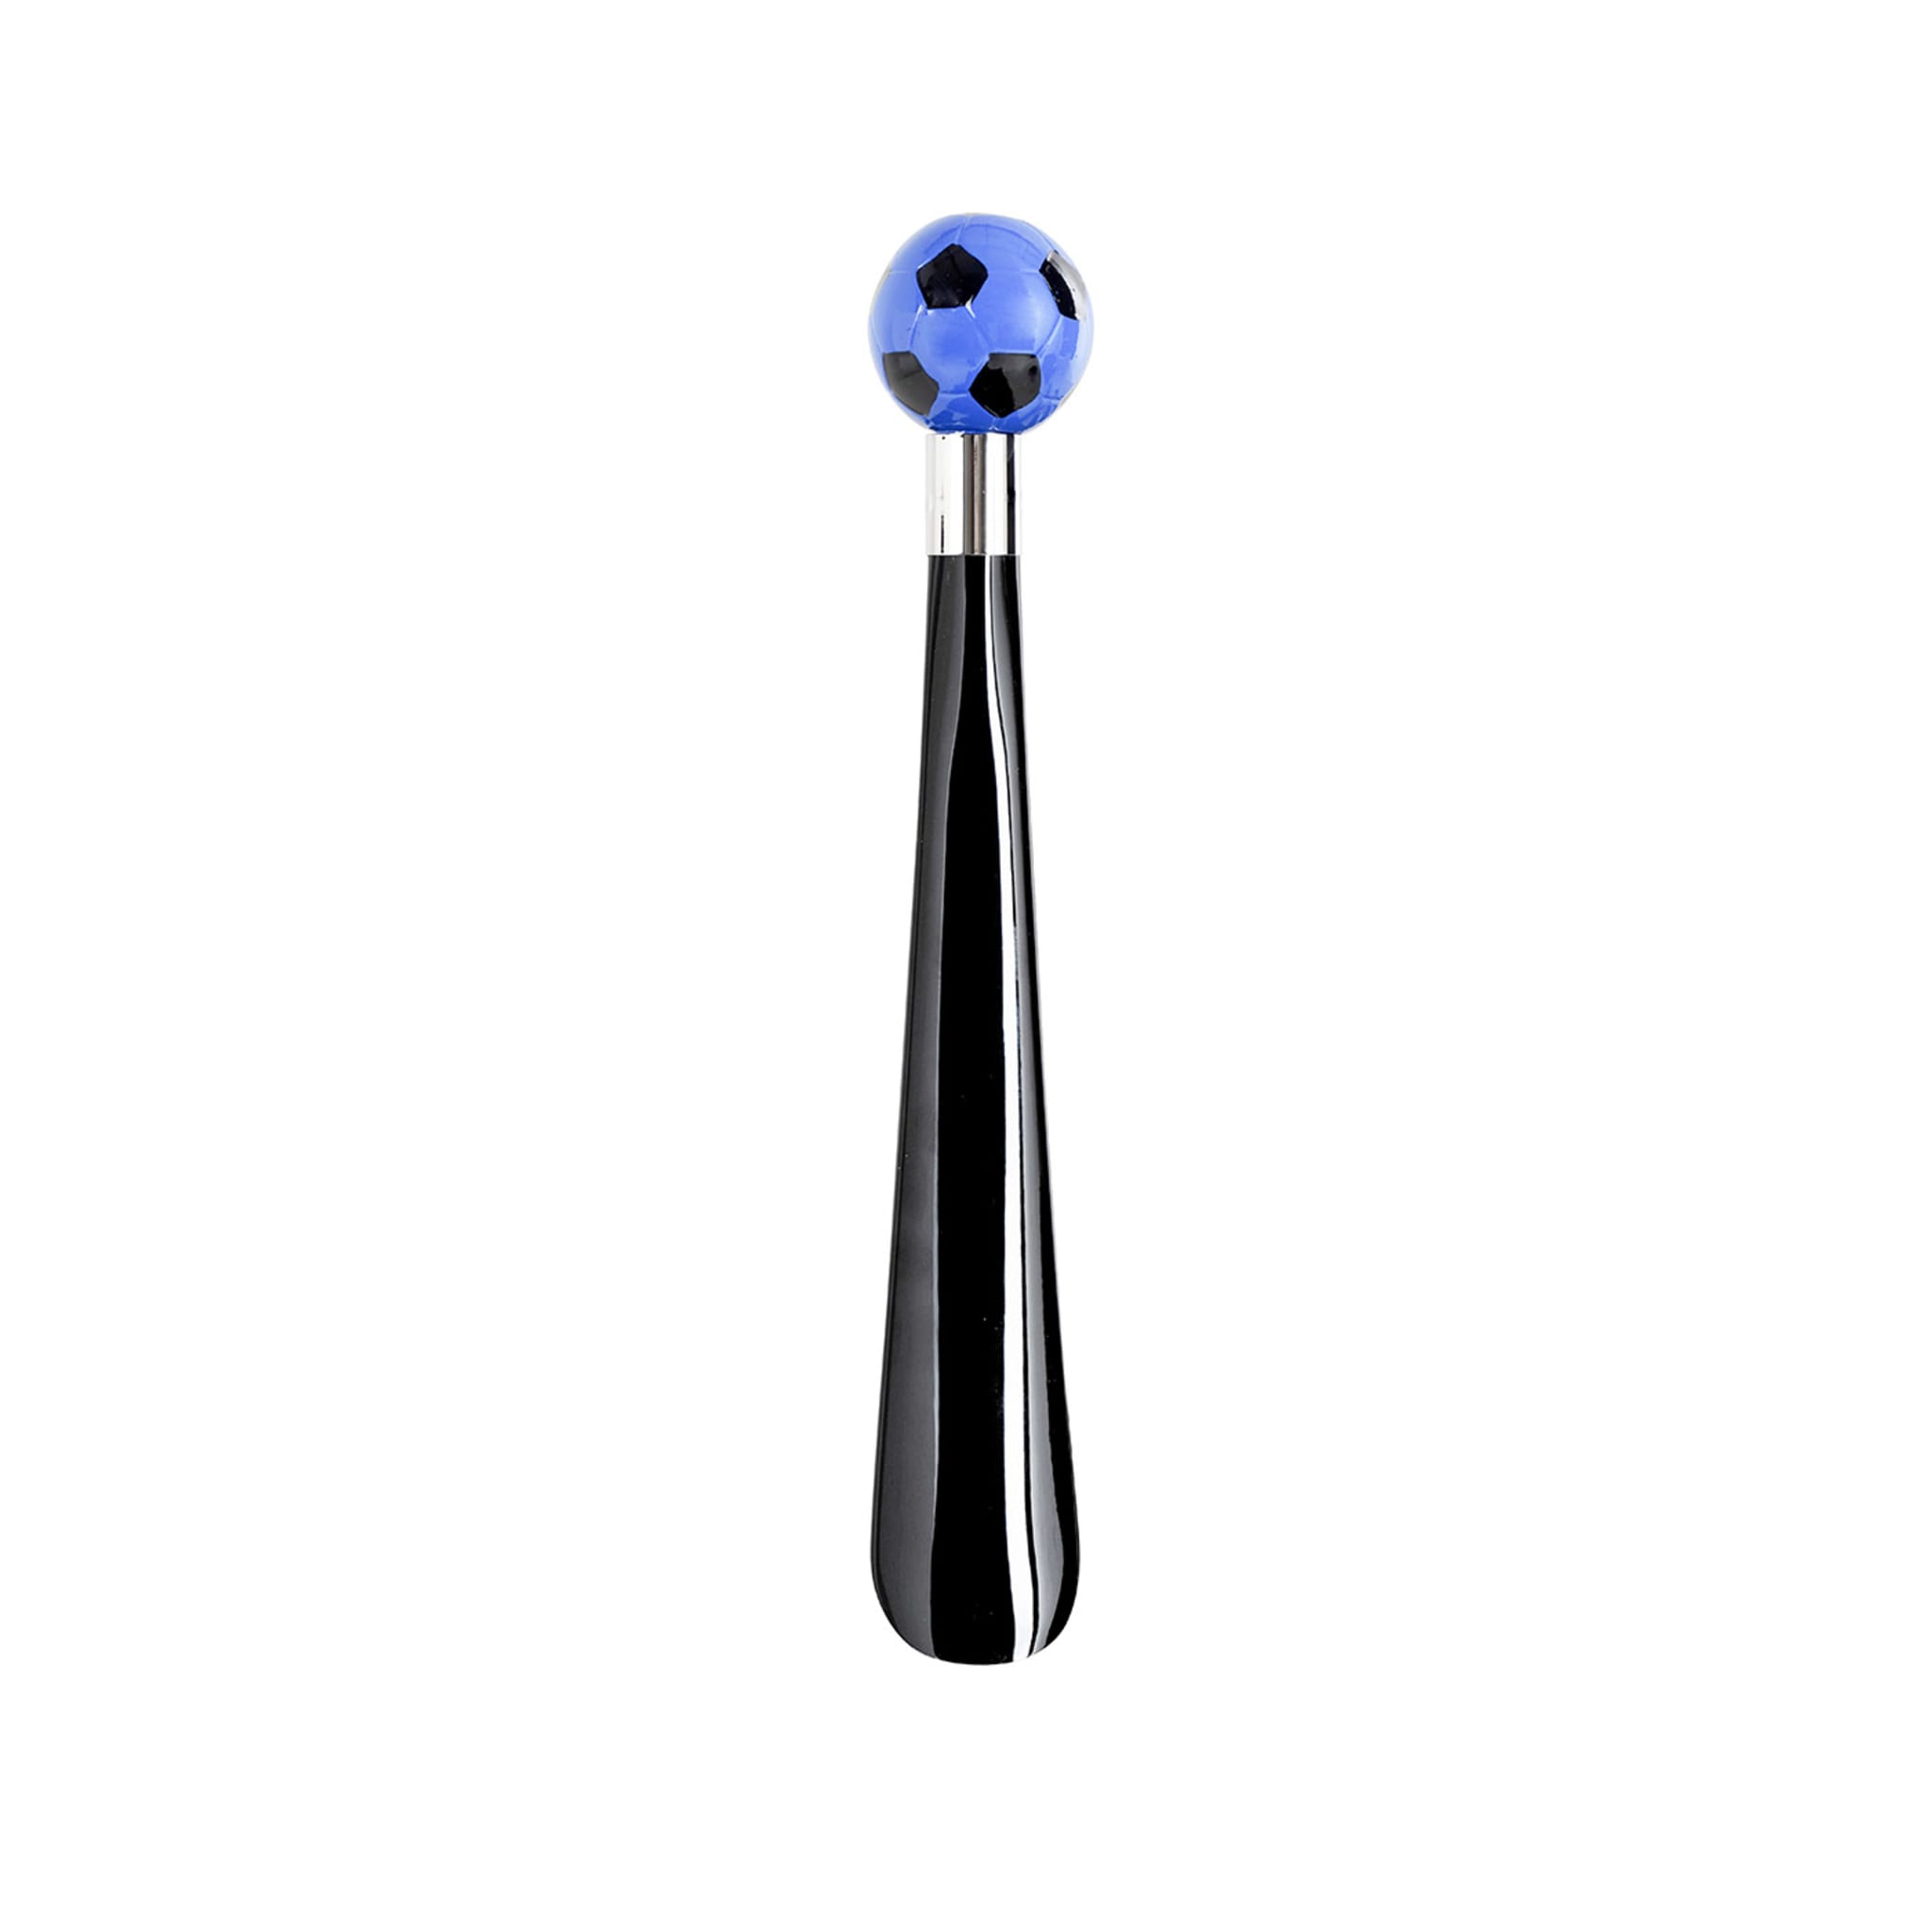 Calcio Small Black & Blue Decorated Shoehorn - Alternative view 2